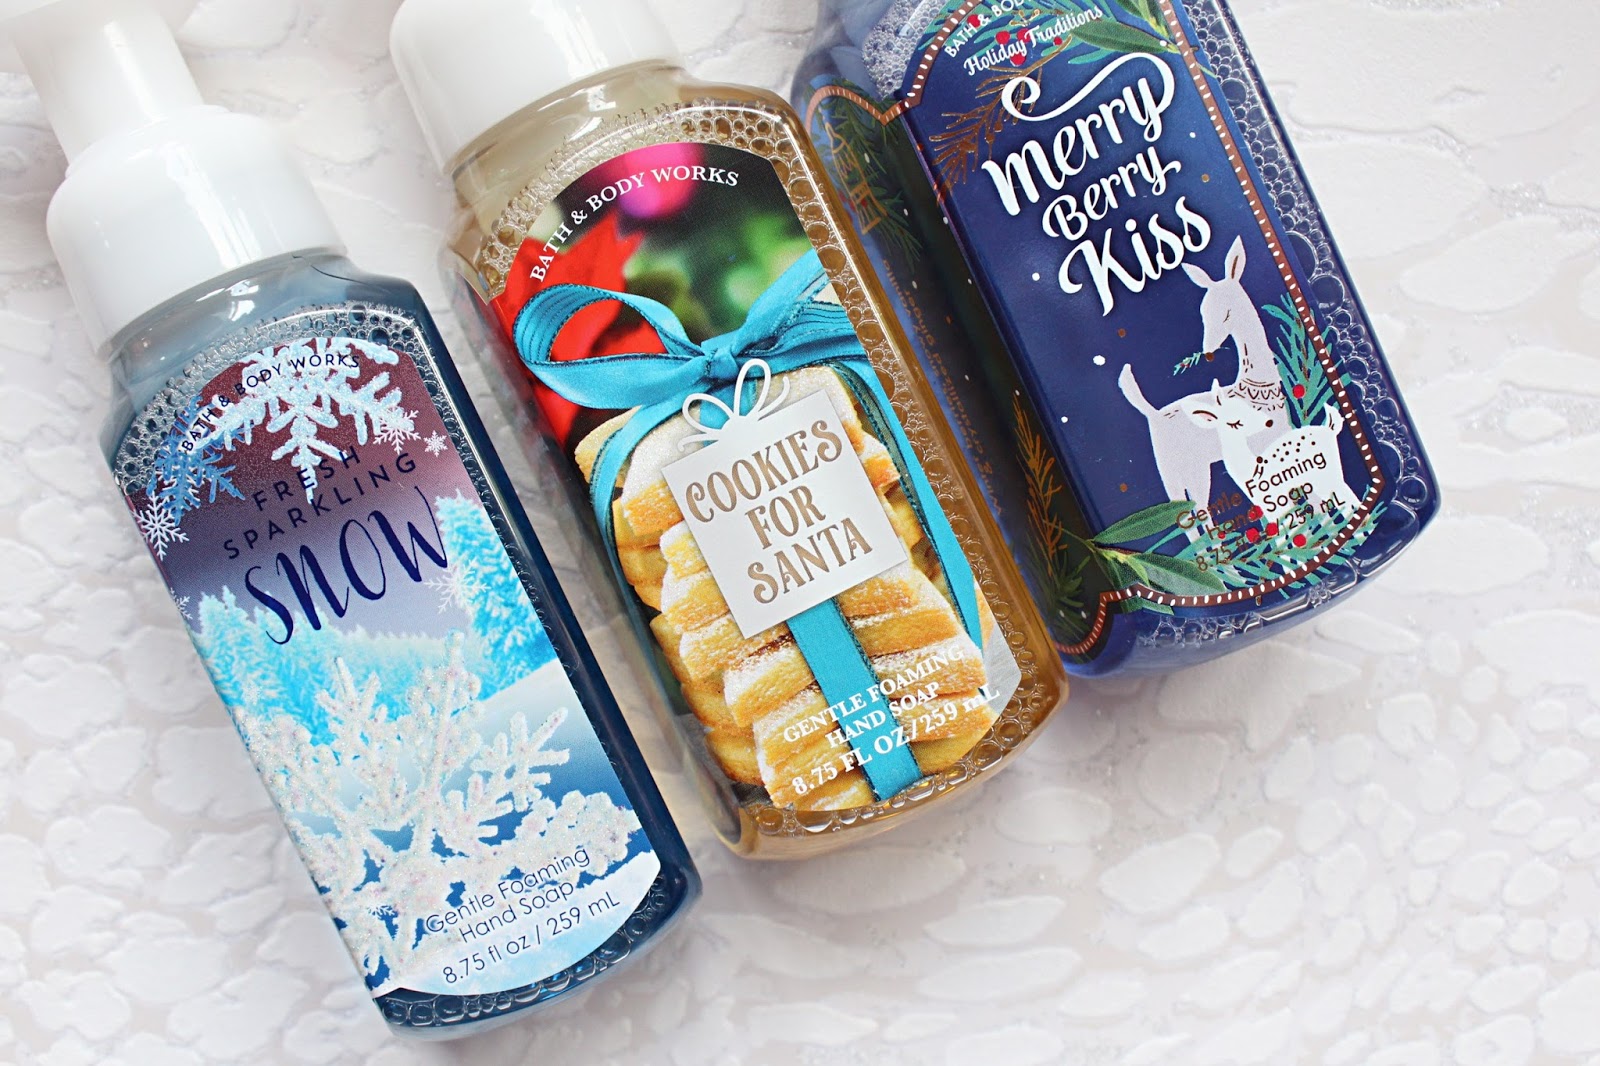 How to Get Bath and Body Works in the UK